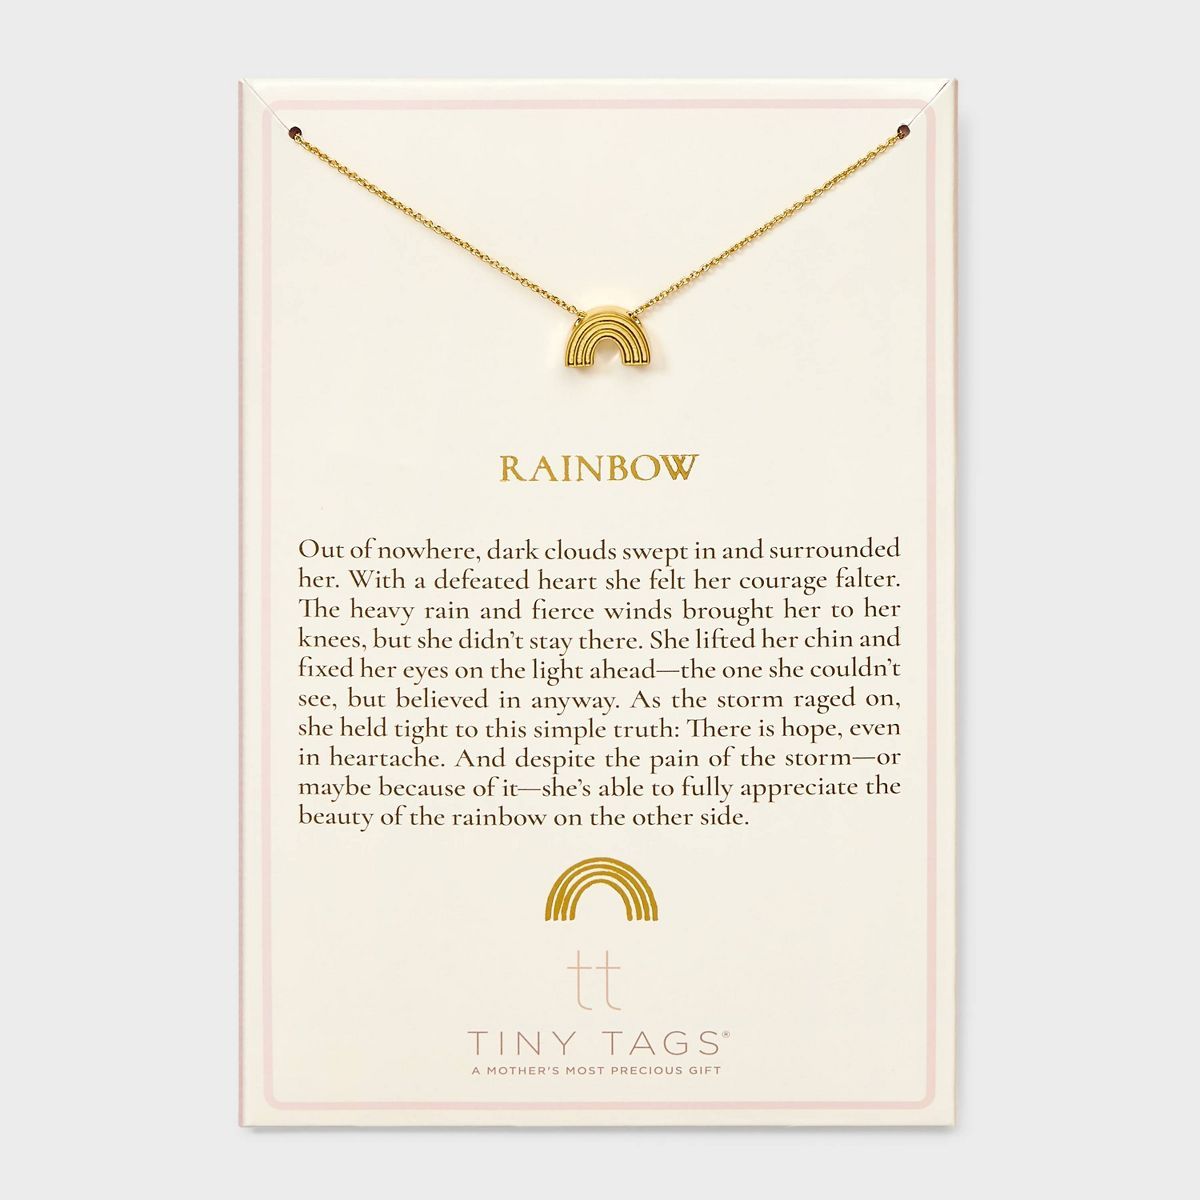 Tiny Tags 14K Gold Ion Plated Rainbow Chain Necklace - Gold | Target